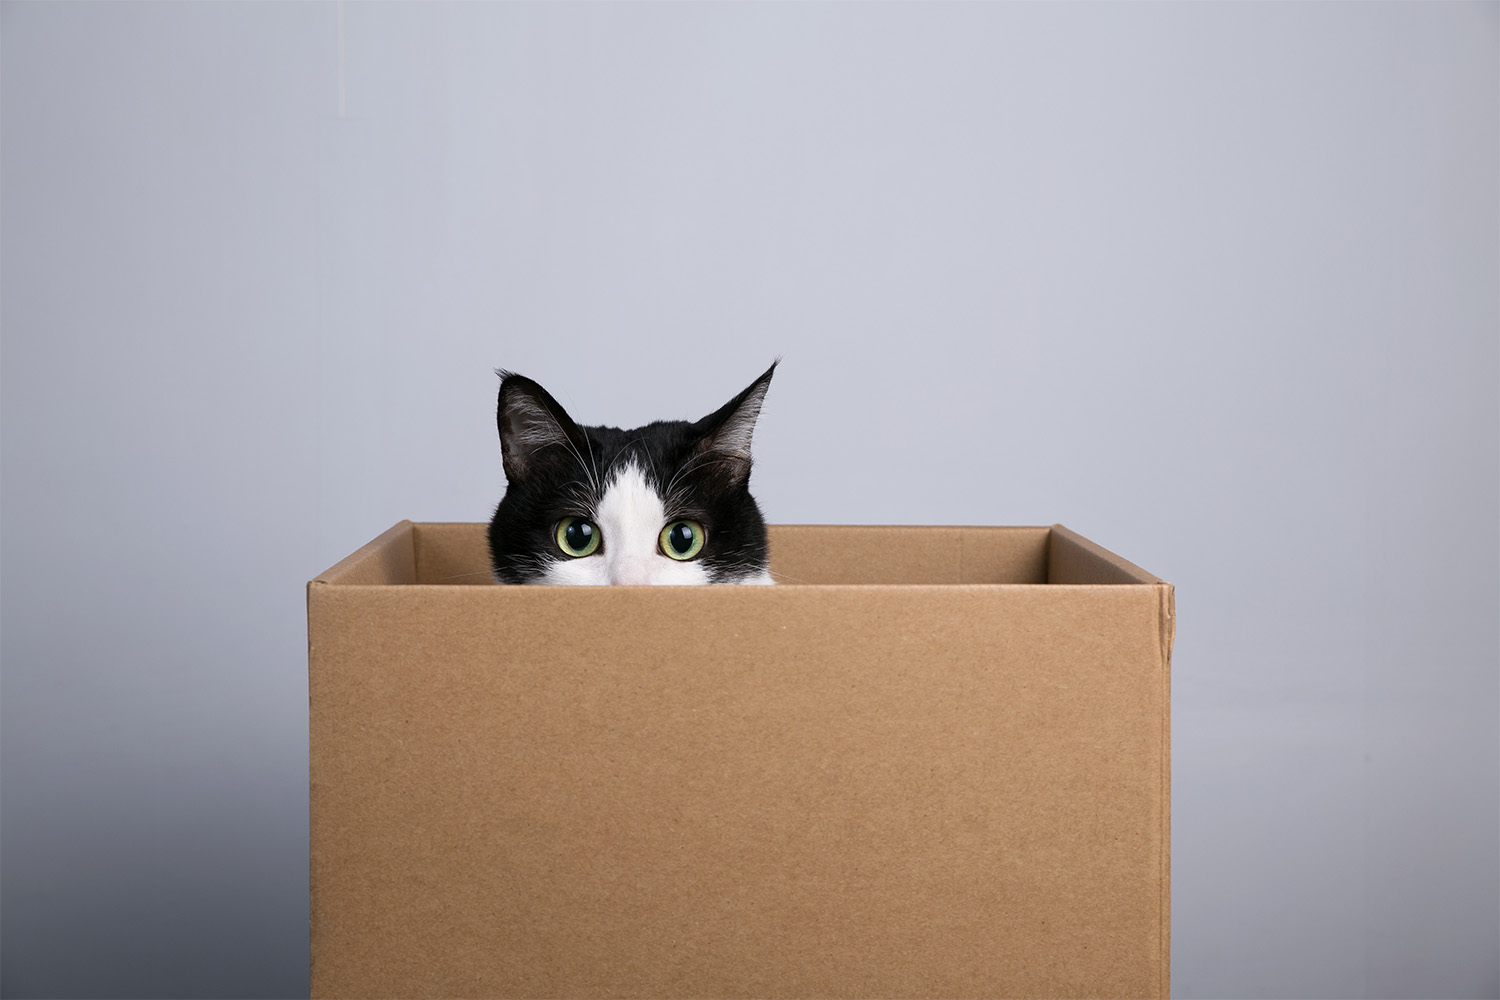 Why Do Cats Like Boxes So Much?